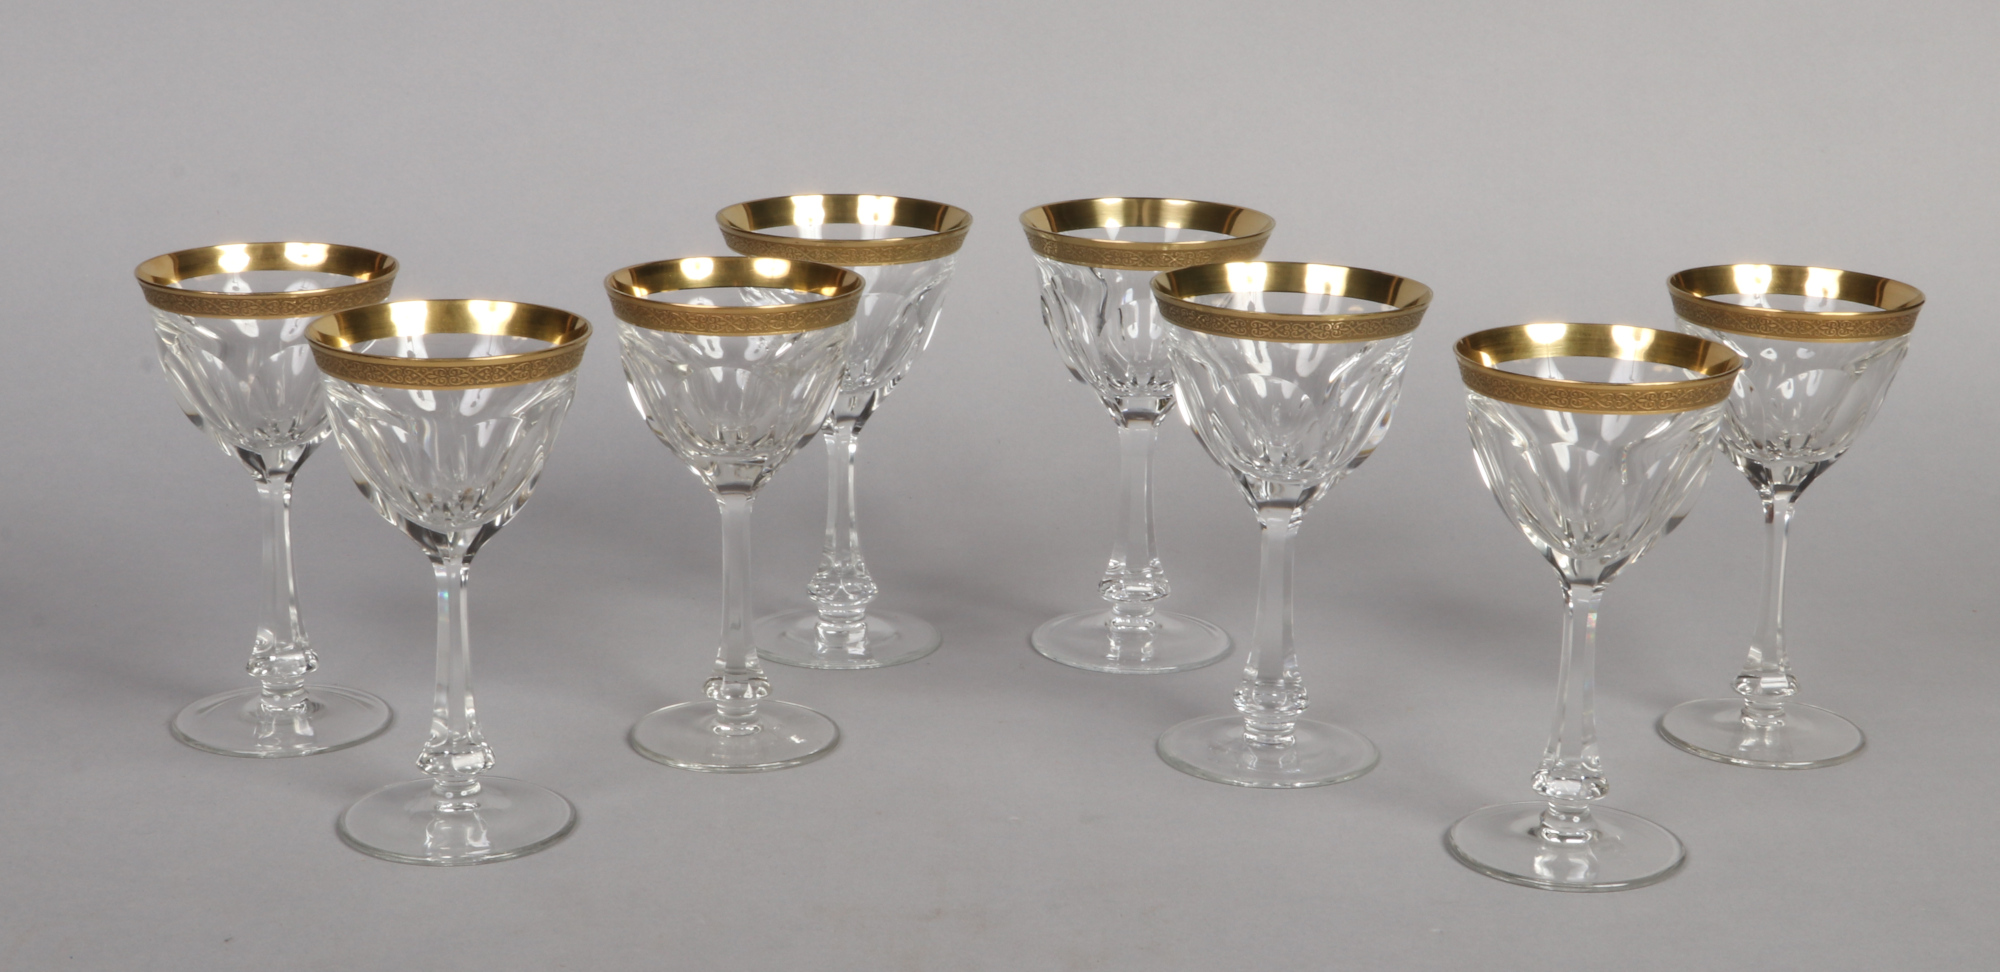 A set of eight Moser red wine glasses in the Lady Hamilton pattern. With etched gold borders and